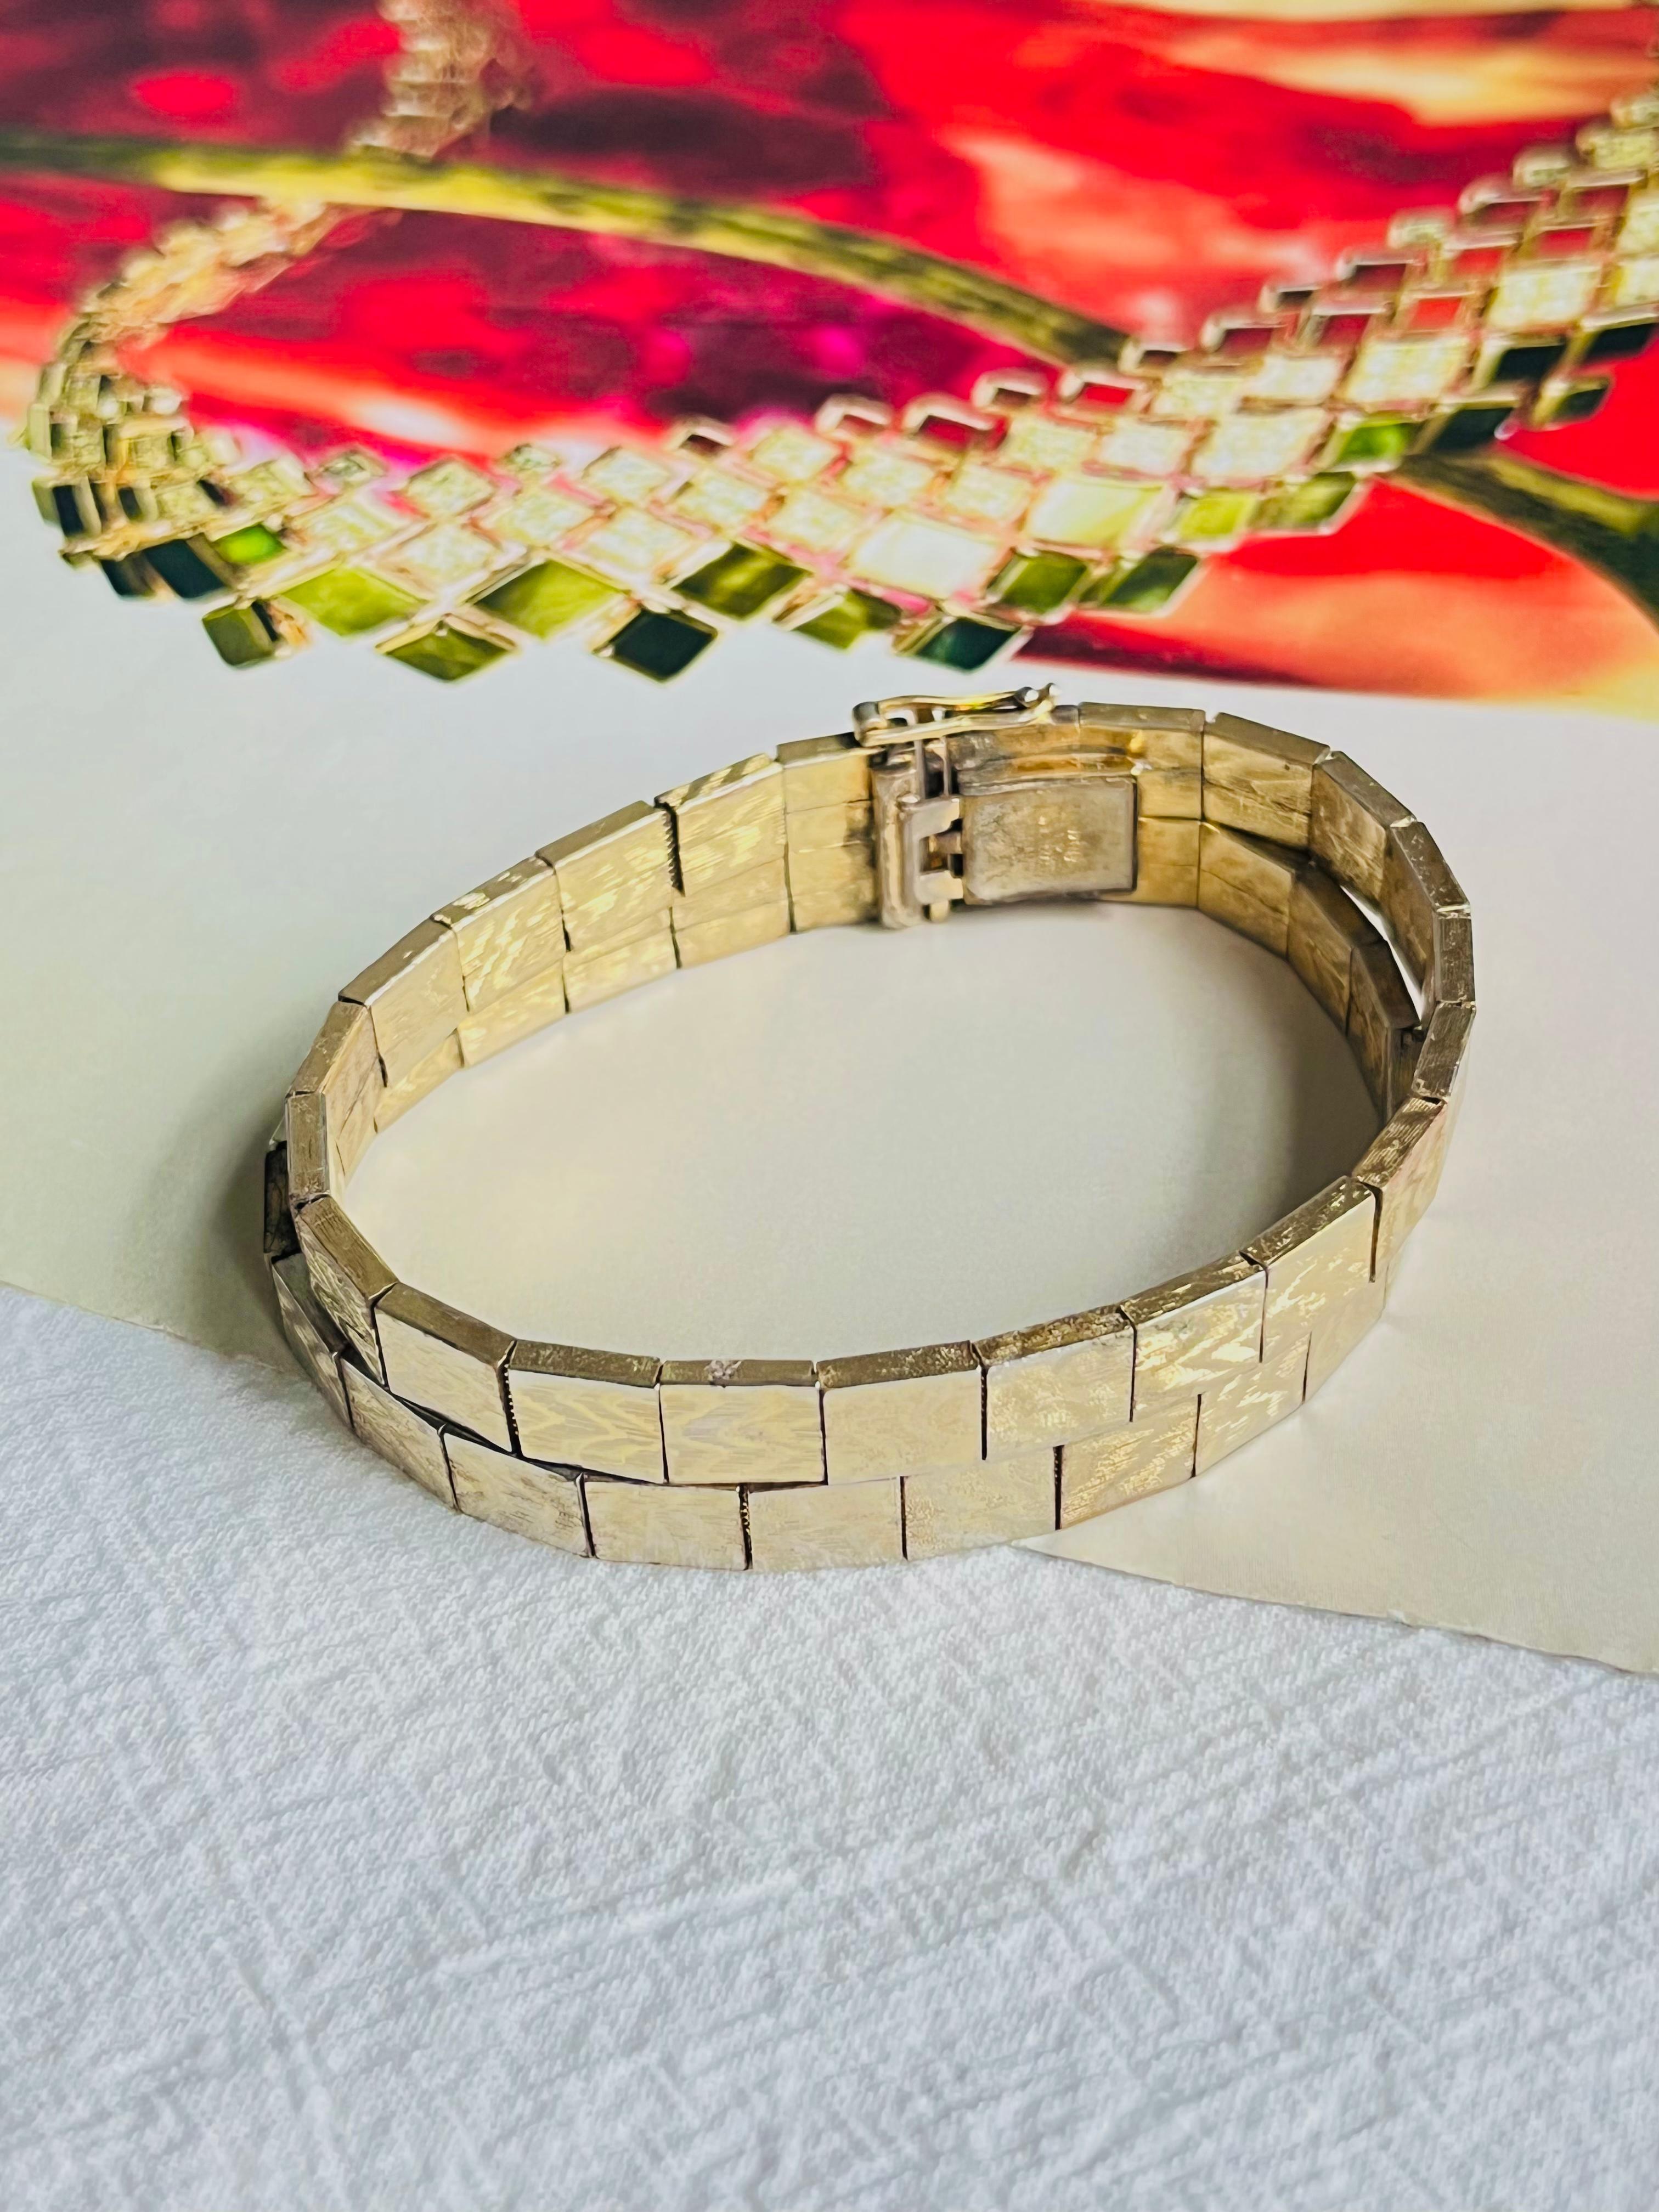 Christian Dior GROSSE 1963 Unisex Double Hinged Rolled Cube Link Cuff Bracelet, Gold Tone

A very beautiful bracelet by GROSSE, signed at the back. 100% Genuine.

Good condition, light scratches and colour loss, still good to wear.

Size: 18.5 *1.0